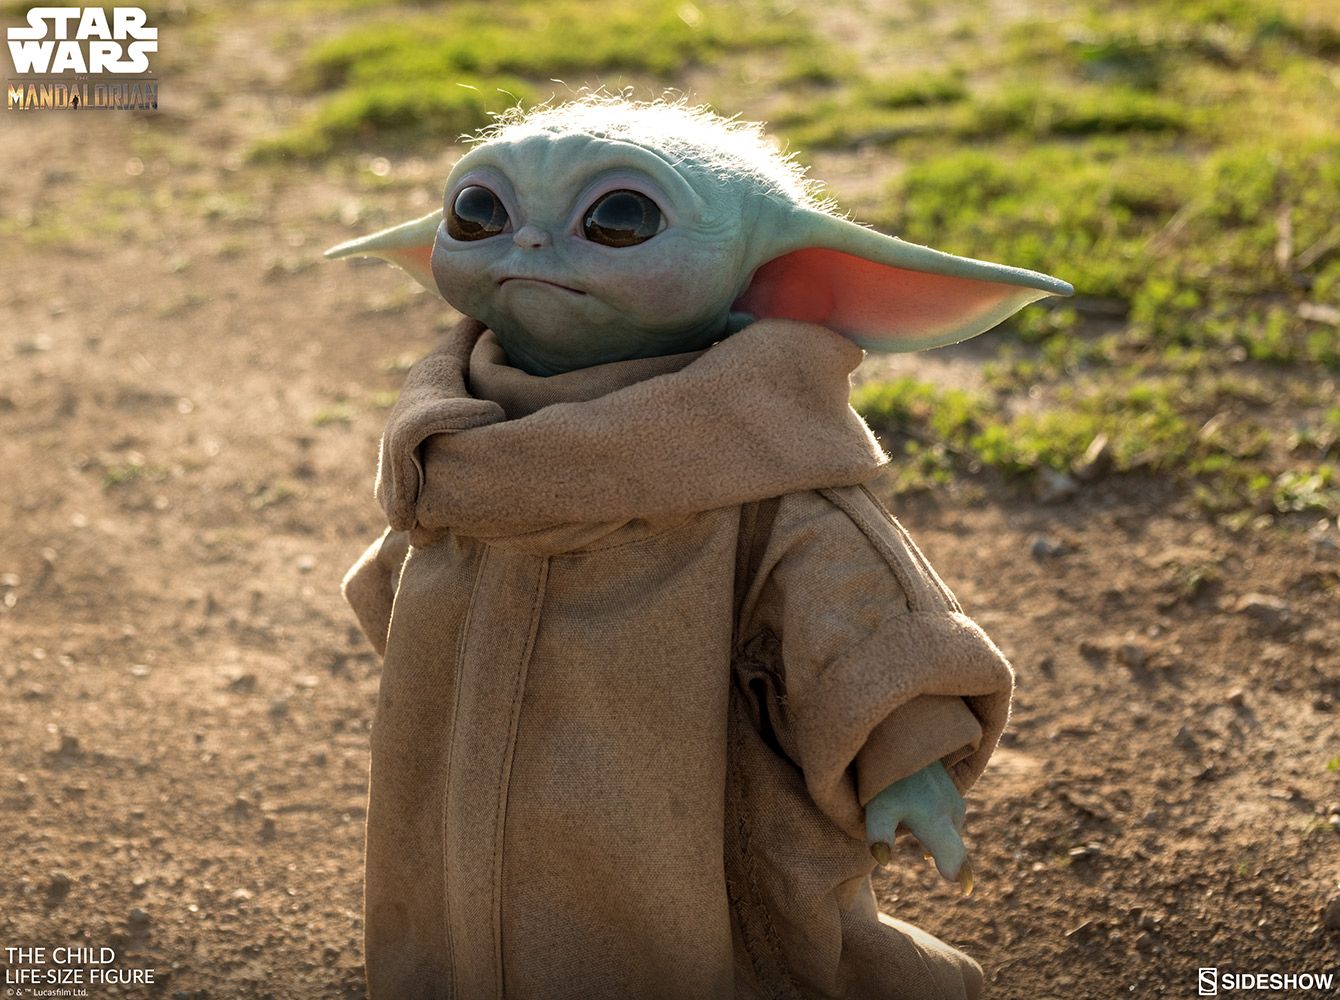 Disney's Baby Yoda Toy Shipments Could Be Delayed